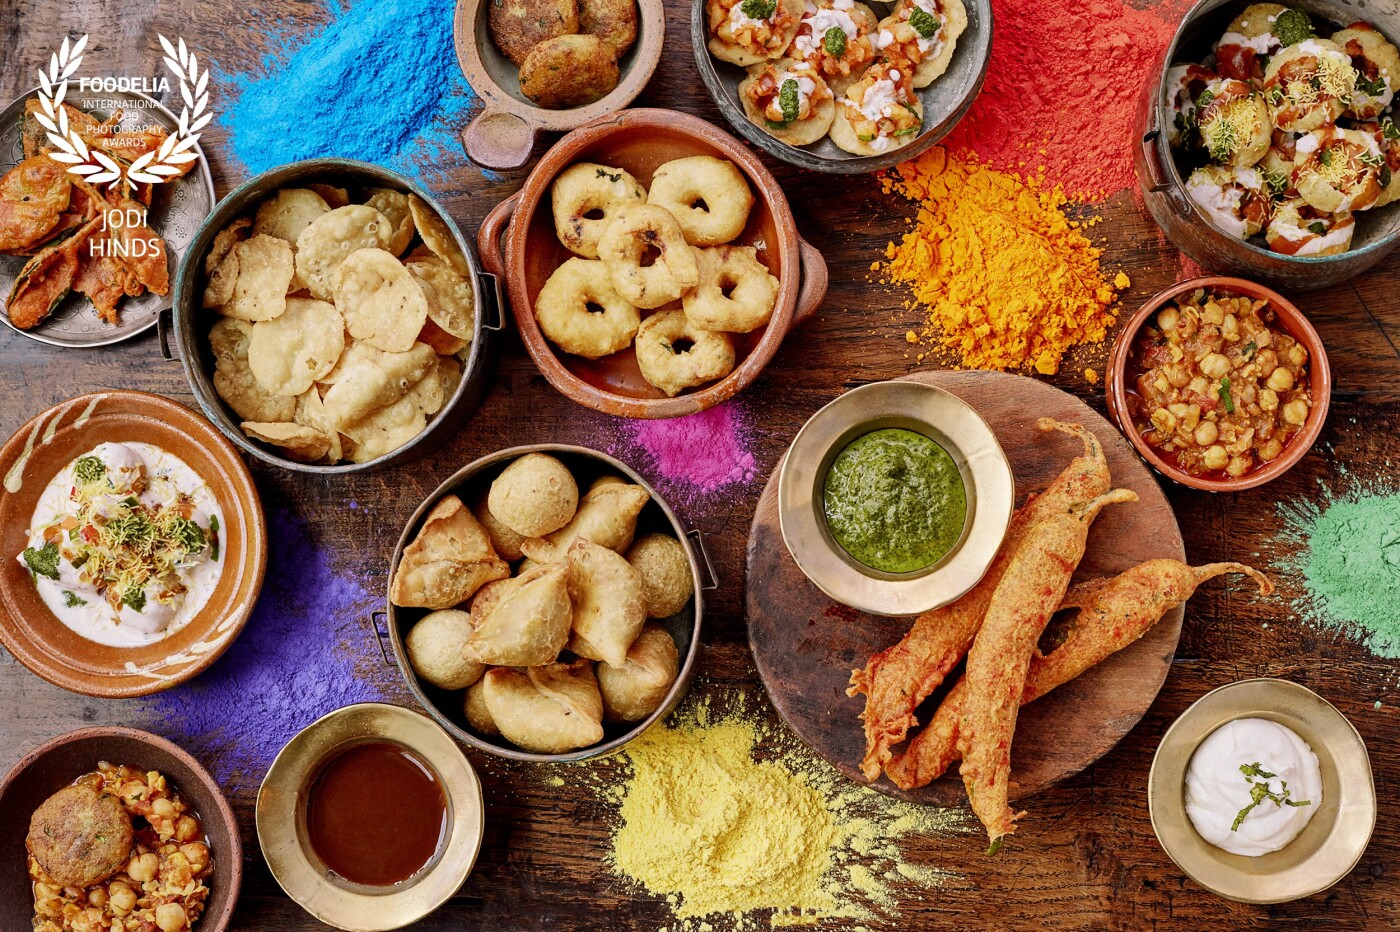 Nothing speaks of Feasting Celebration like Vivek Singh's latest book.  Bringing rich heritage of religious festivals with cultural celebrations, it's an incredibly colourful and enriching book. <br />
<br />
Holi Chaats with Holi paint<br />
Chef: @chefviveksingh with @fiffififirdaus<br />
Publisher: @bloomsburycooks @absolute_press<br />
Retoucher: @theforgeuk<br />
Photographer: @jodihindsphoto